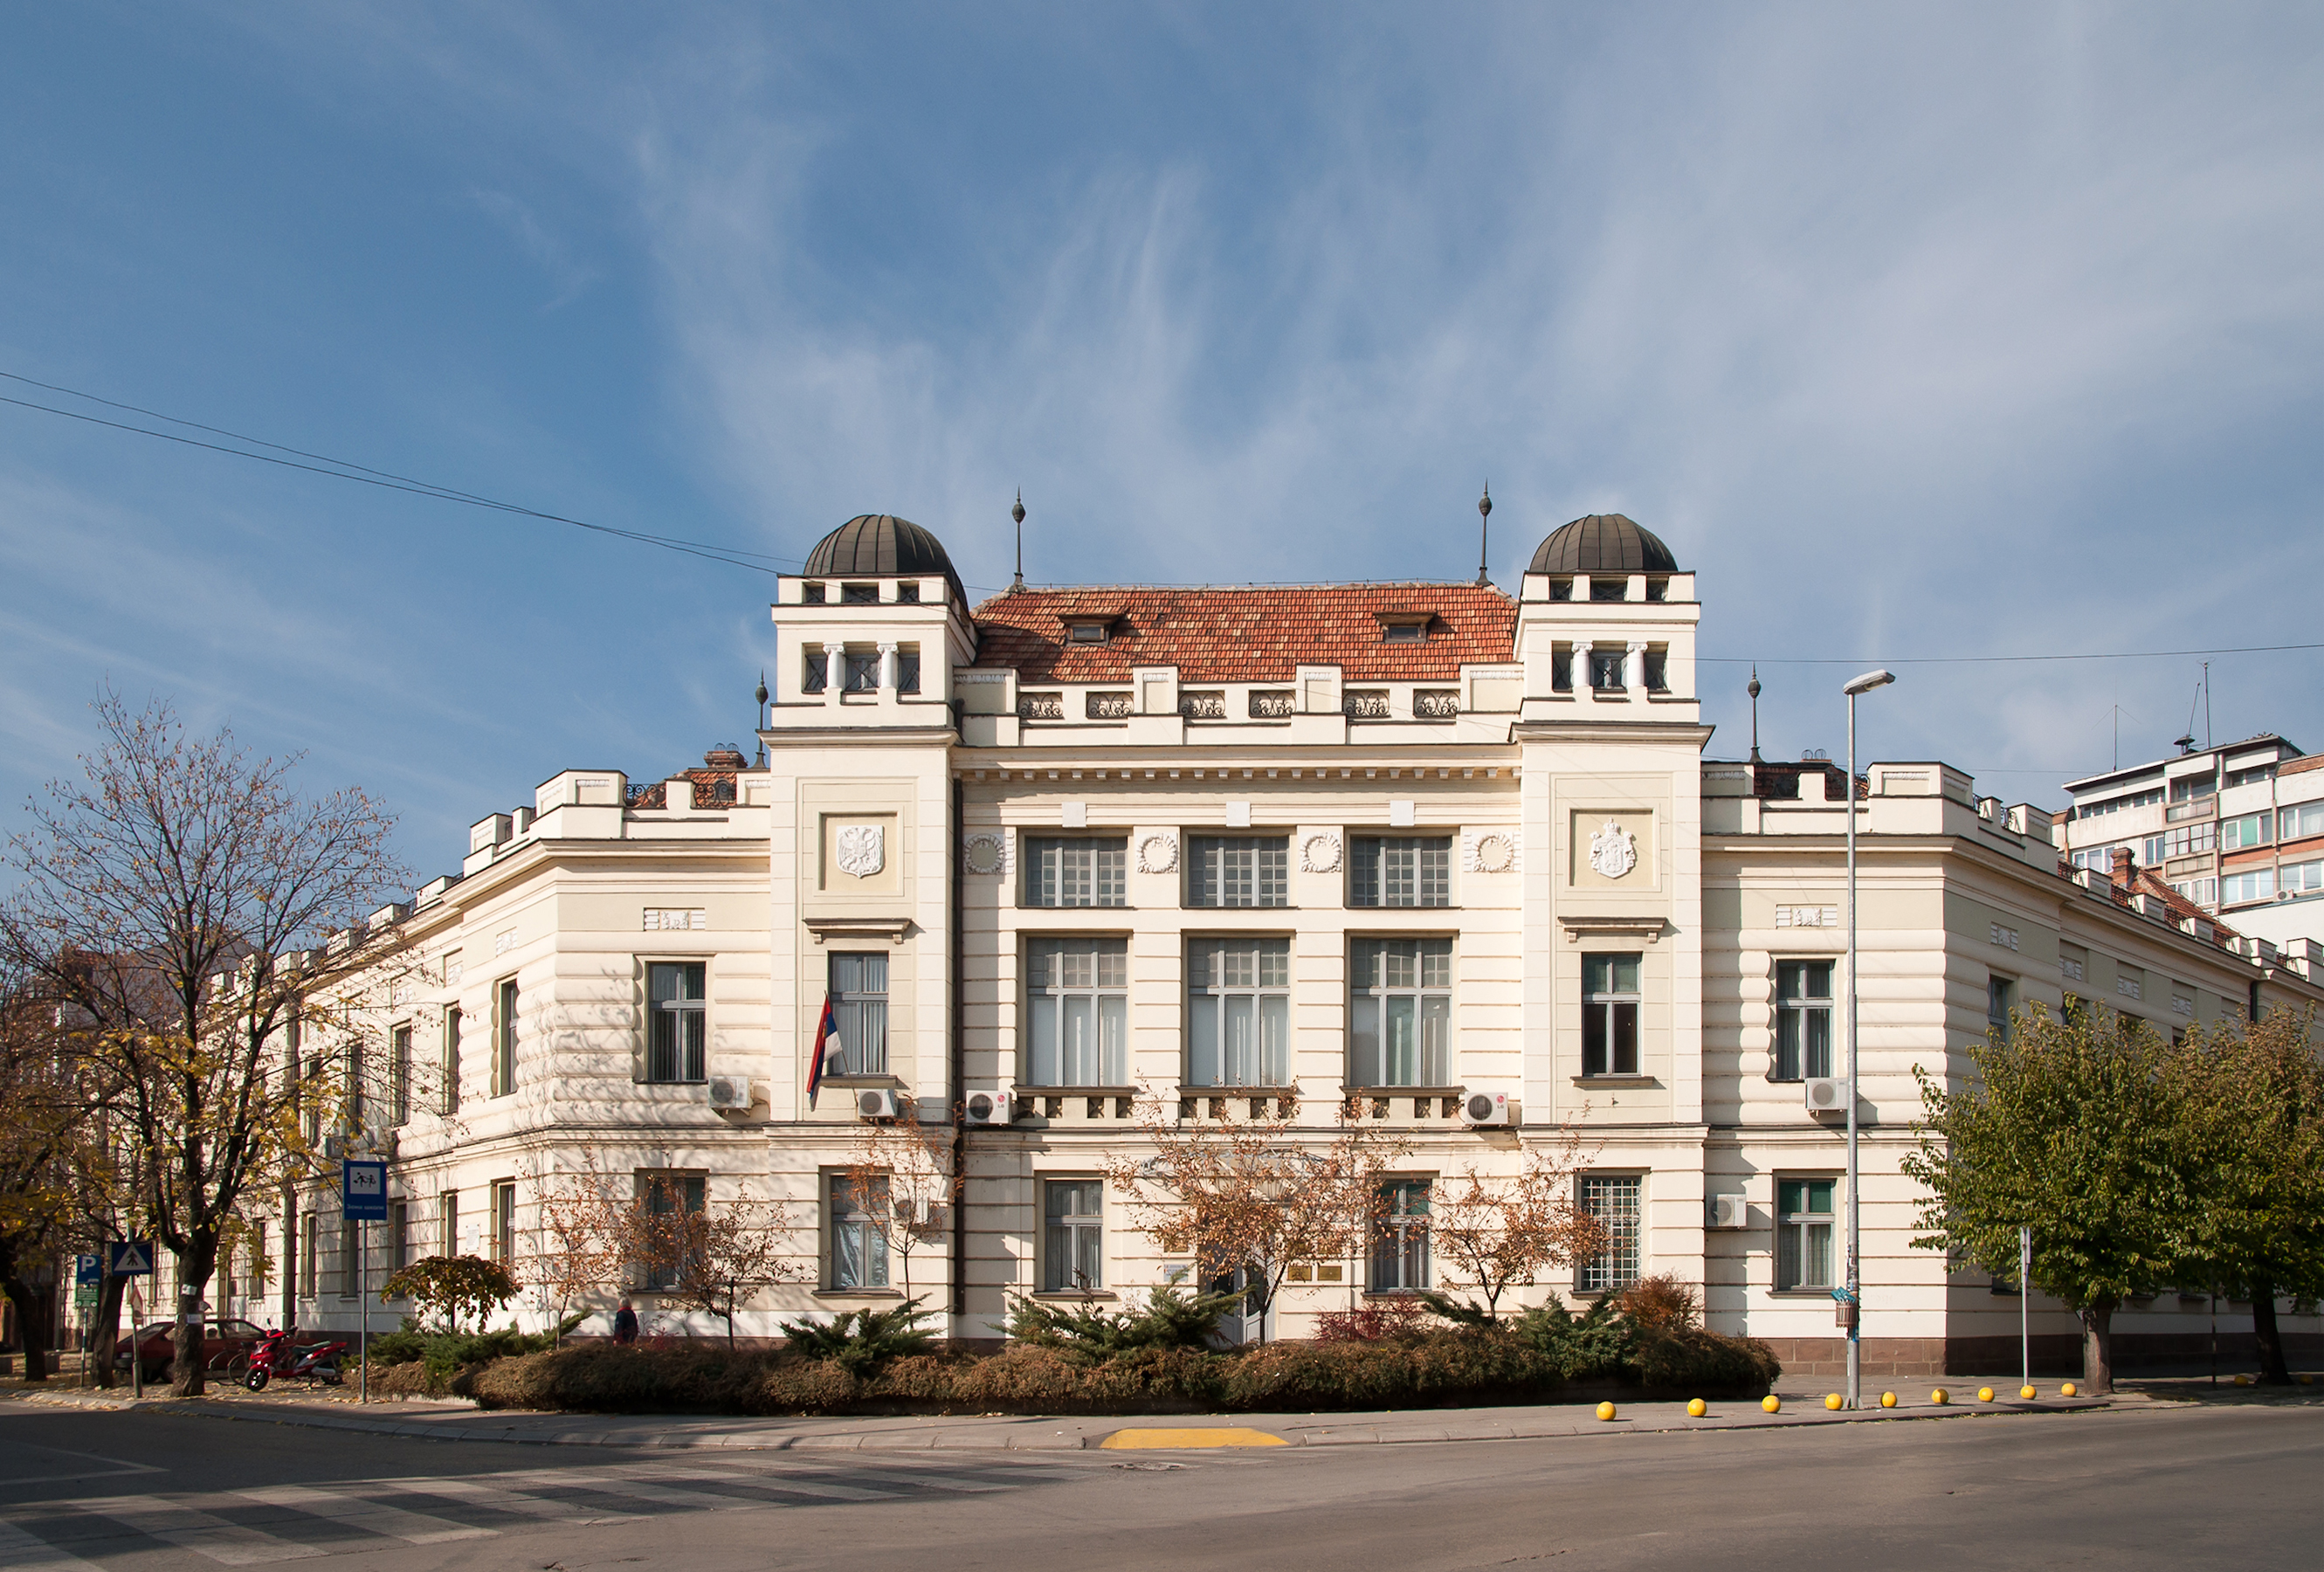 Pirot Courthouse